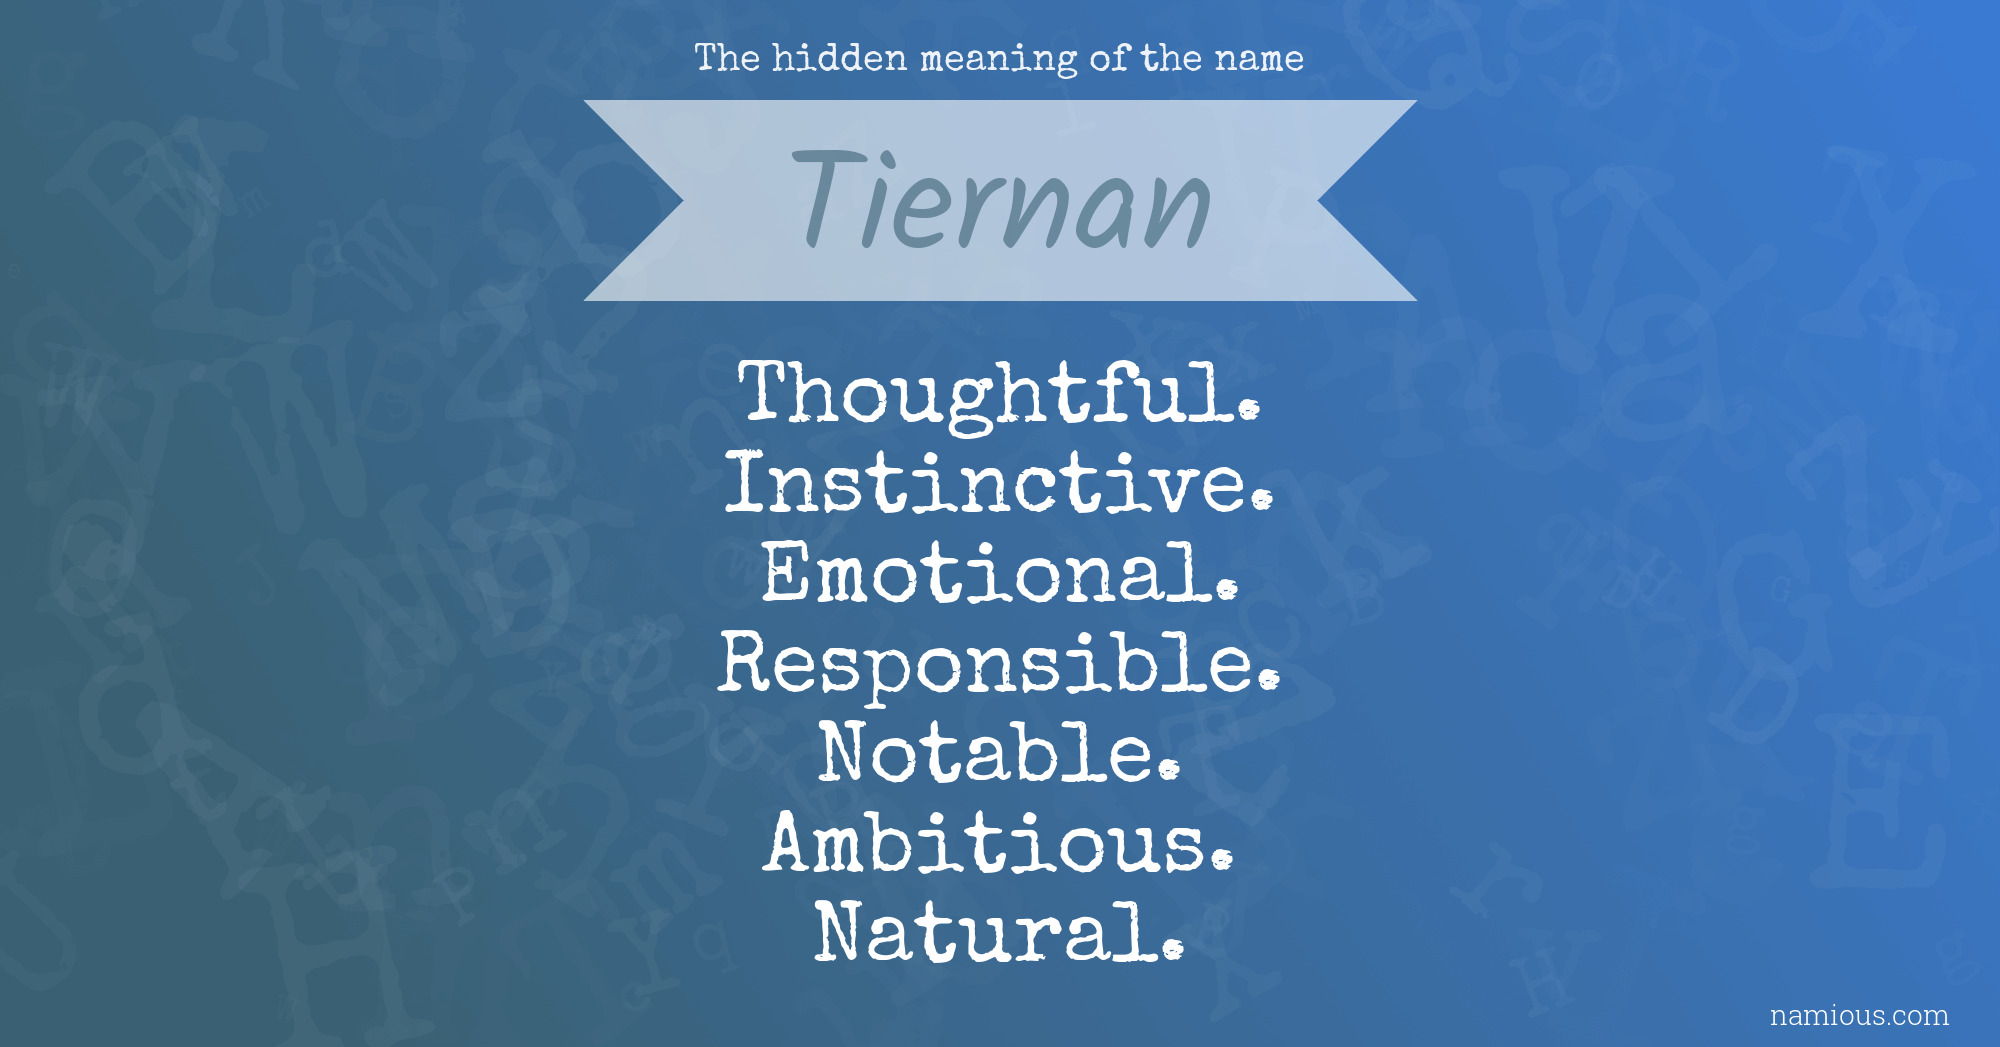 The hidden meaning of the name Tiernan